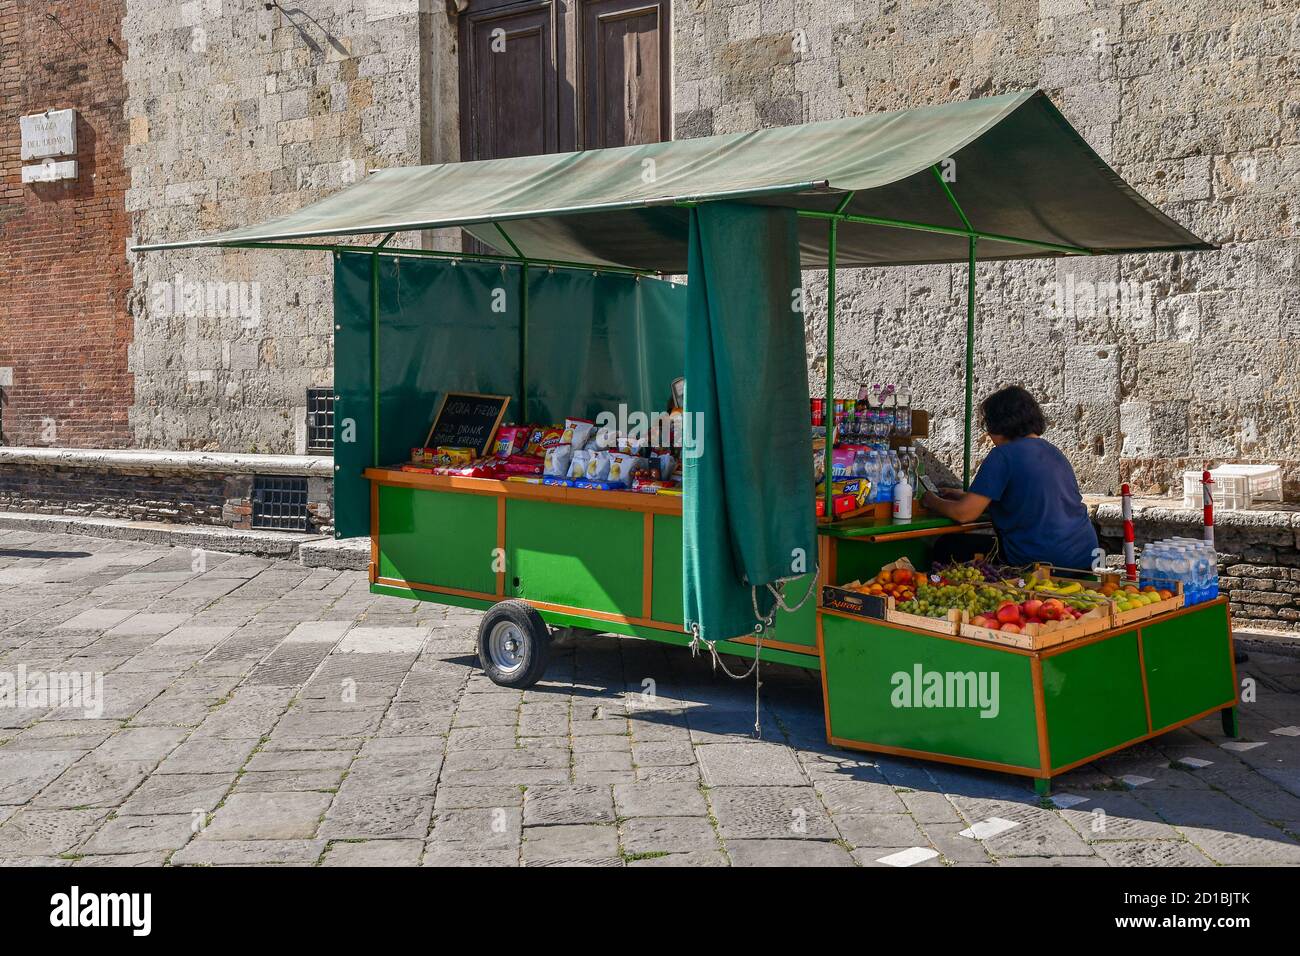 Tourist food and drink stall in front of the medieval Santa Maria della Scala former hospital in the centre of Siena, Unesco W.H. Site, Tuscany, Italy Stock Photo